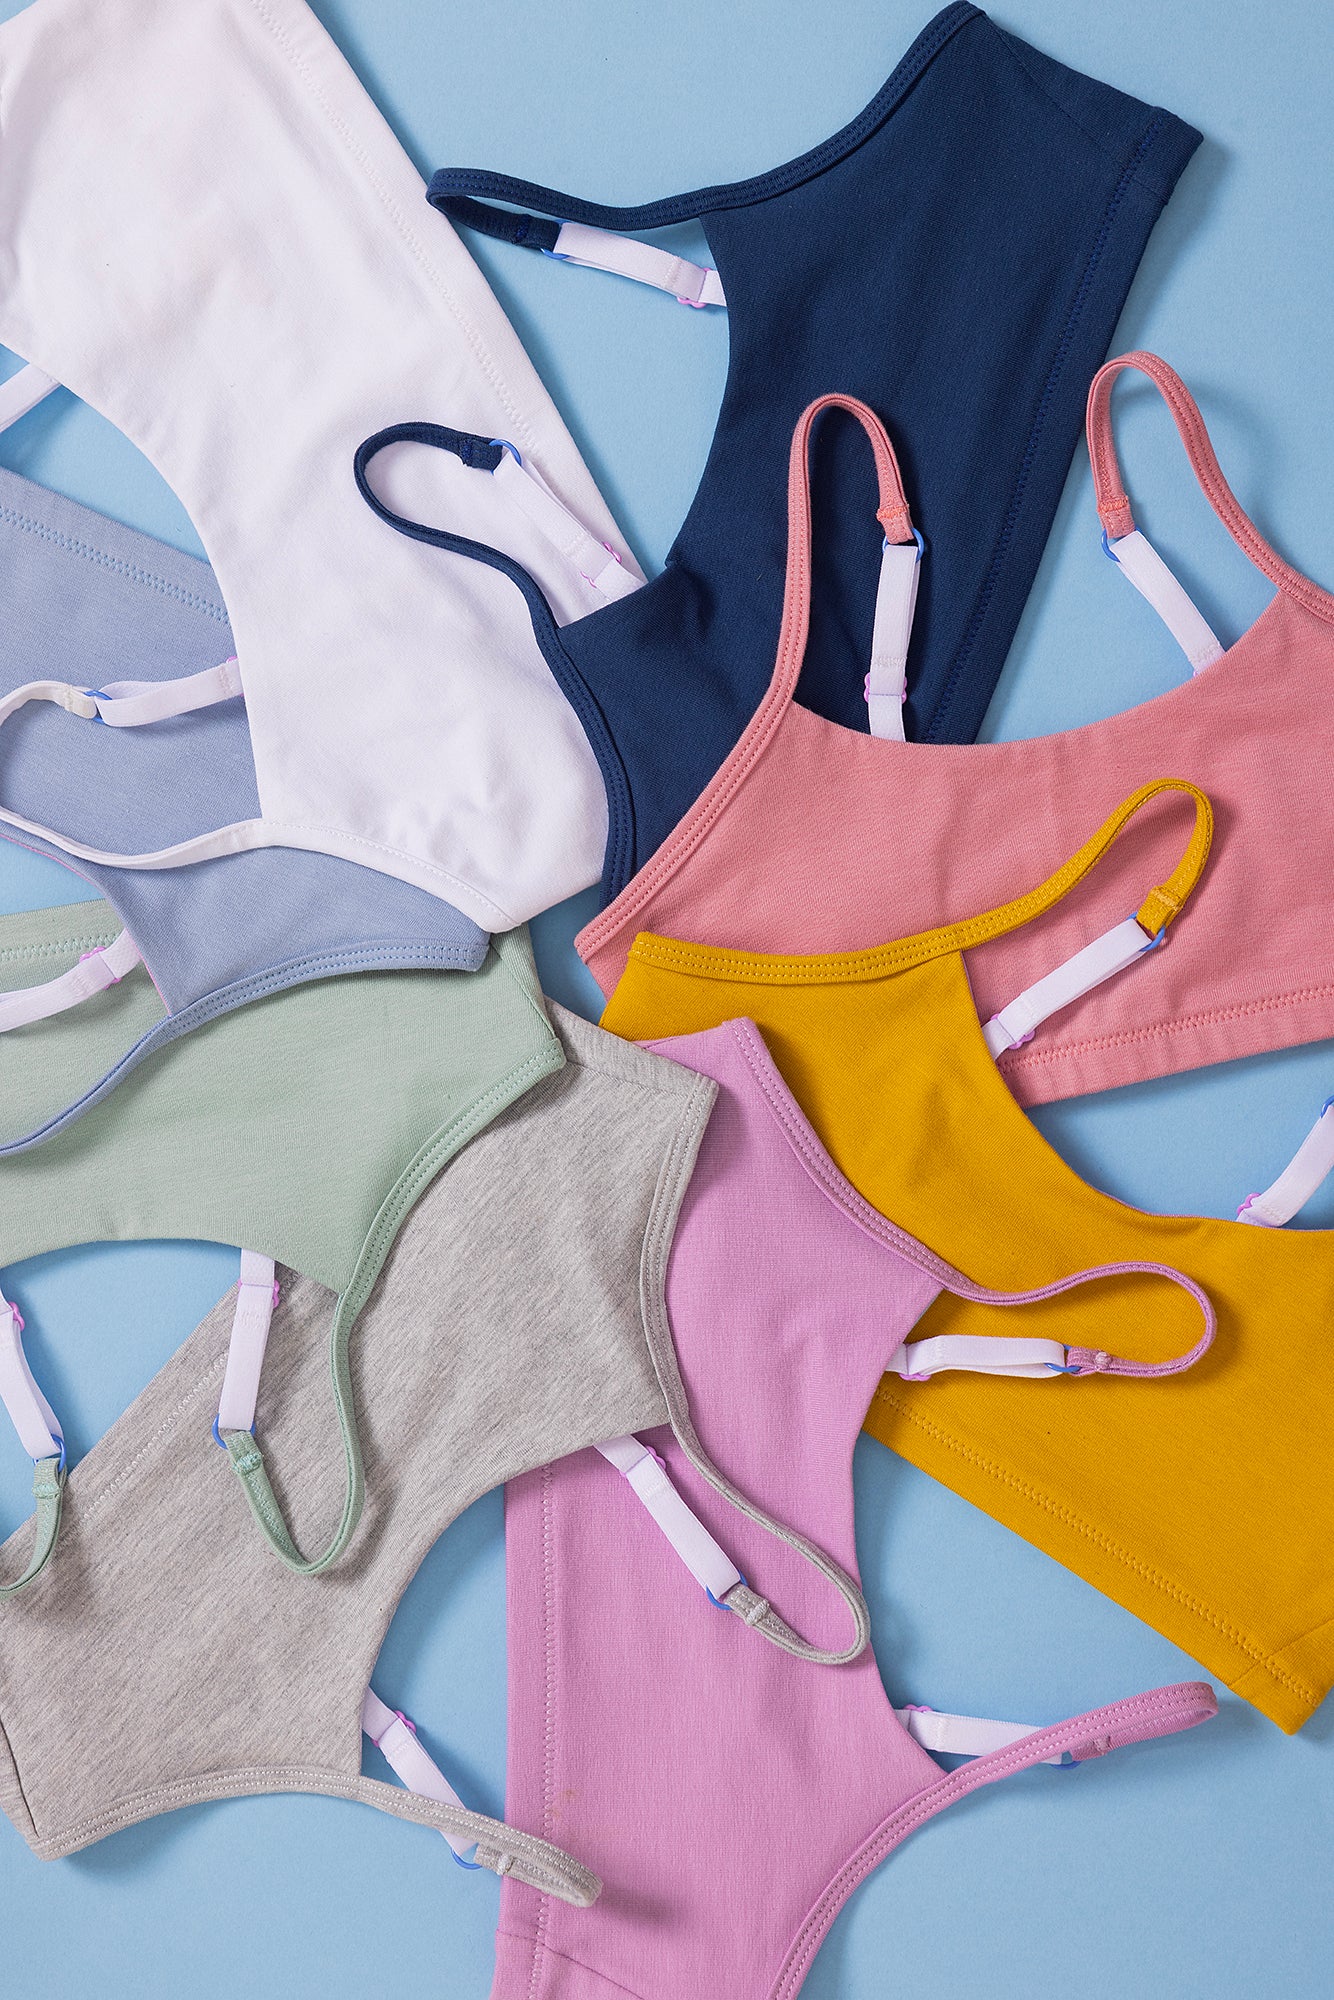 OLI UNDIES FIRST BRA FOR YOUNG GIRLS